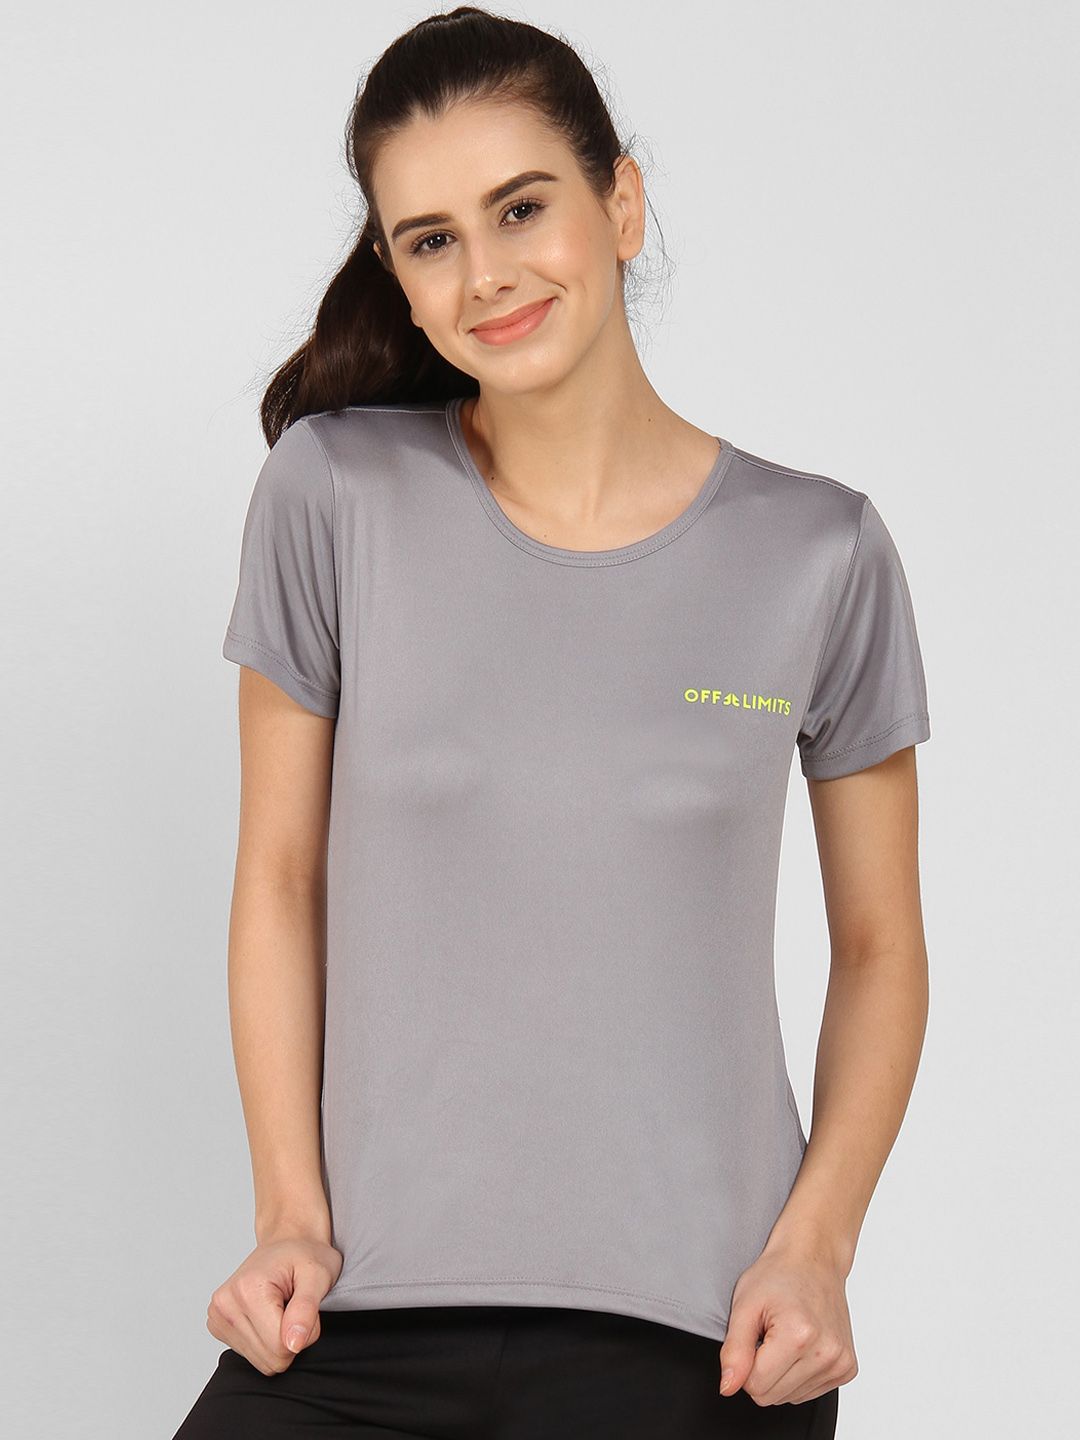 OFF LIMITS Women Grey Solid Round Neck T-shirt Price in India